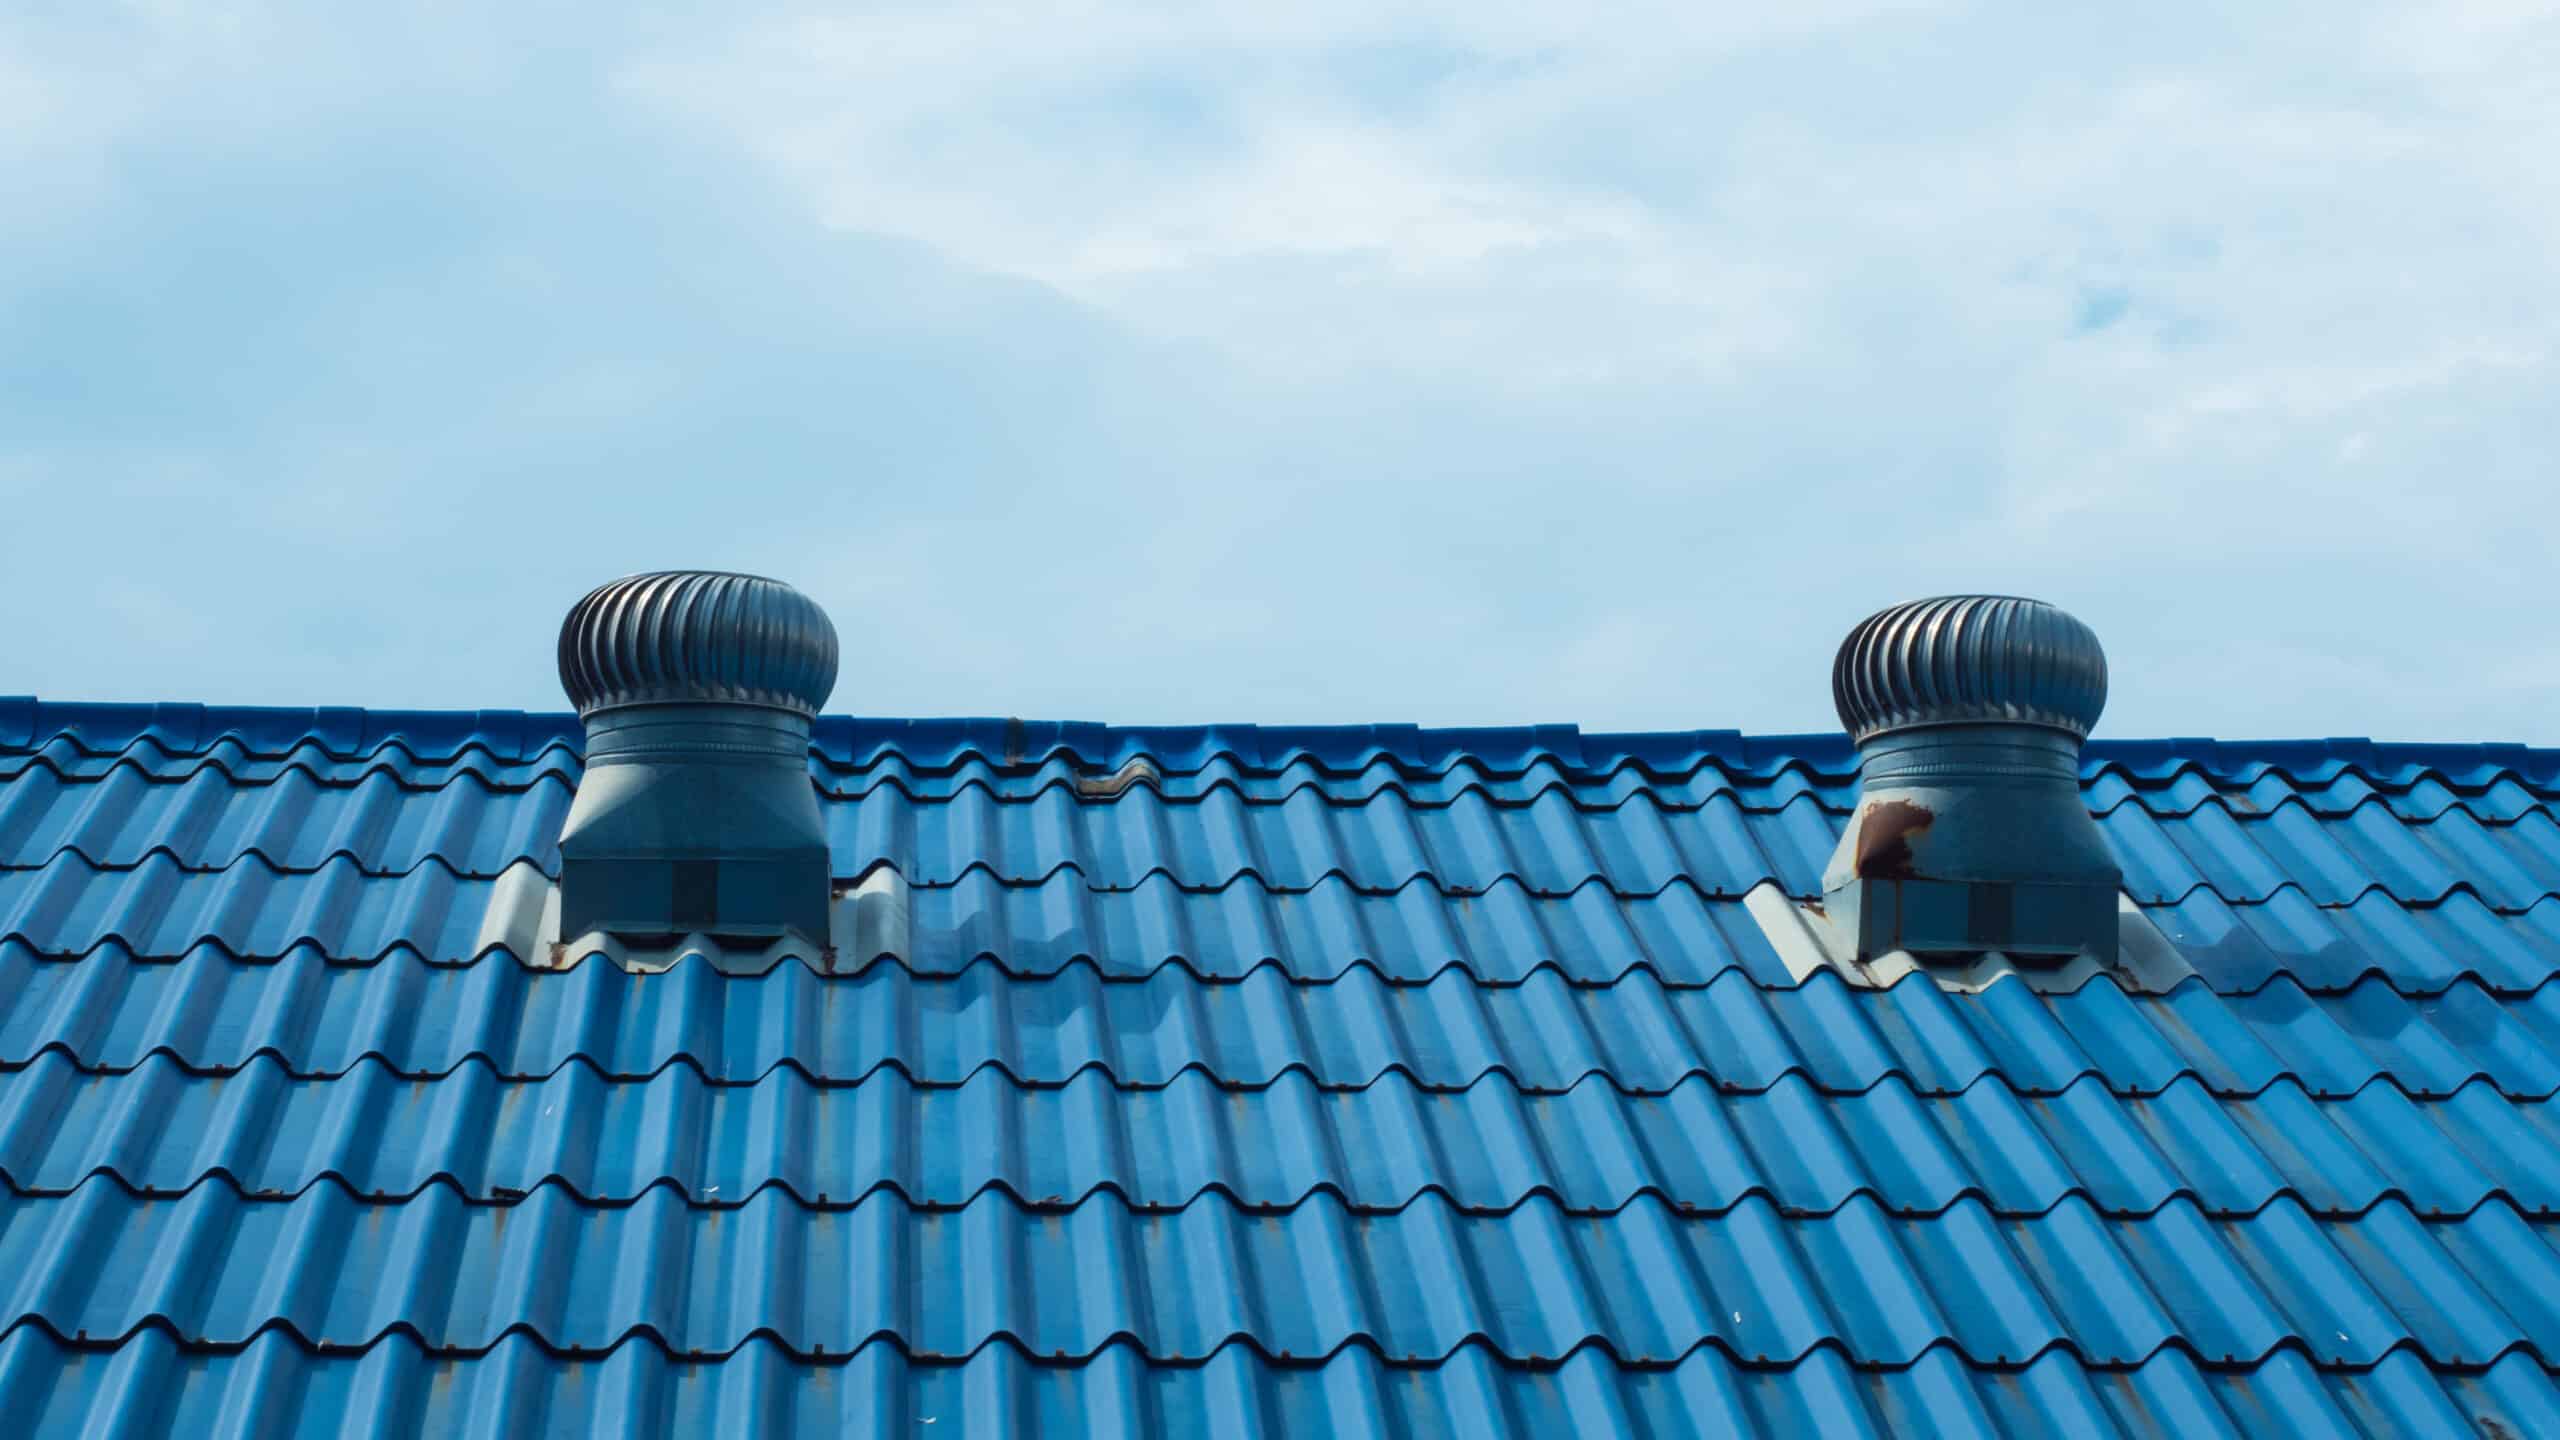 Vents on a metal shingled roof.